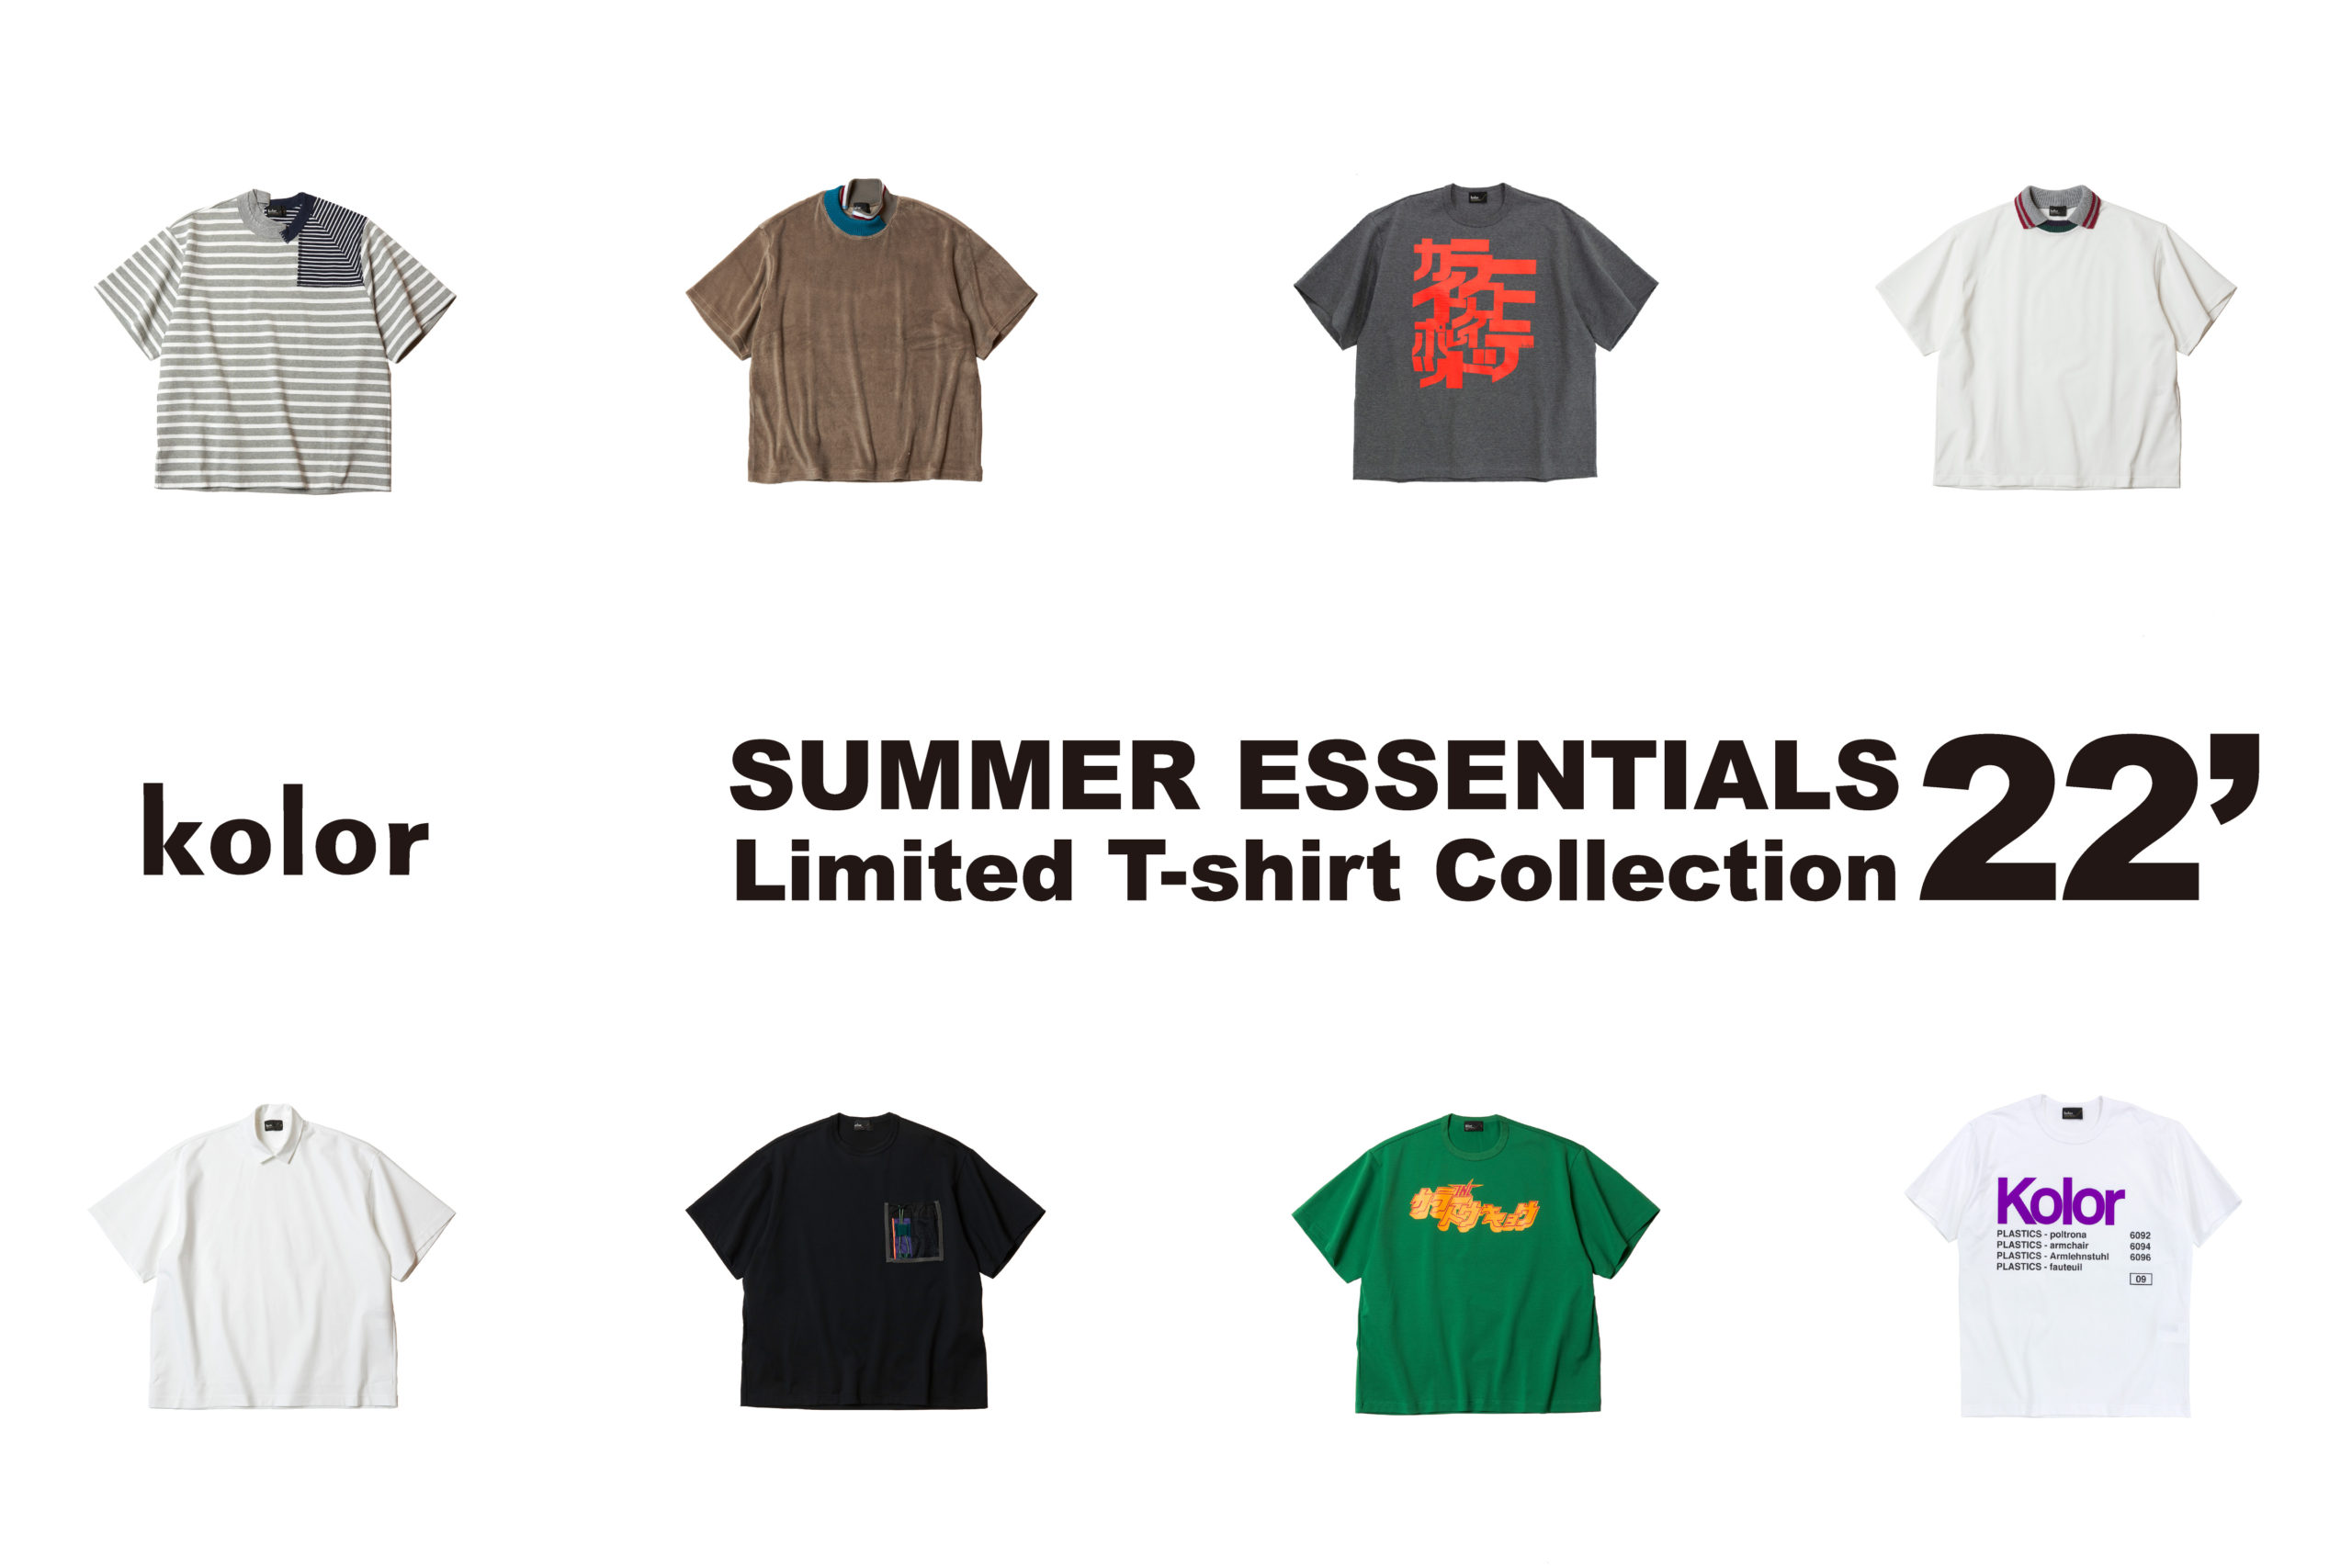 KOLOR「SUMMER ESSENTIALS 22' Limited T-shirt Collection